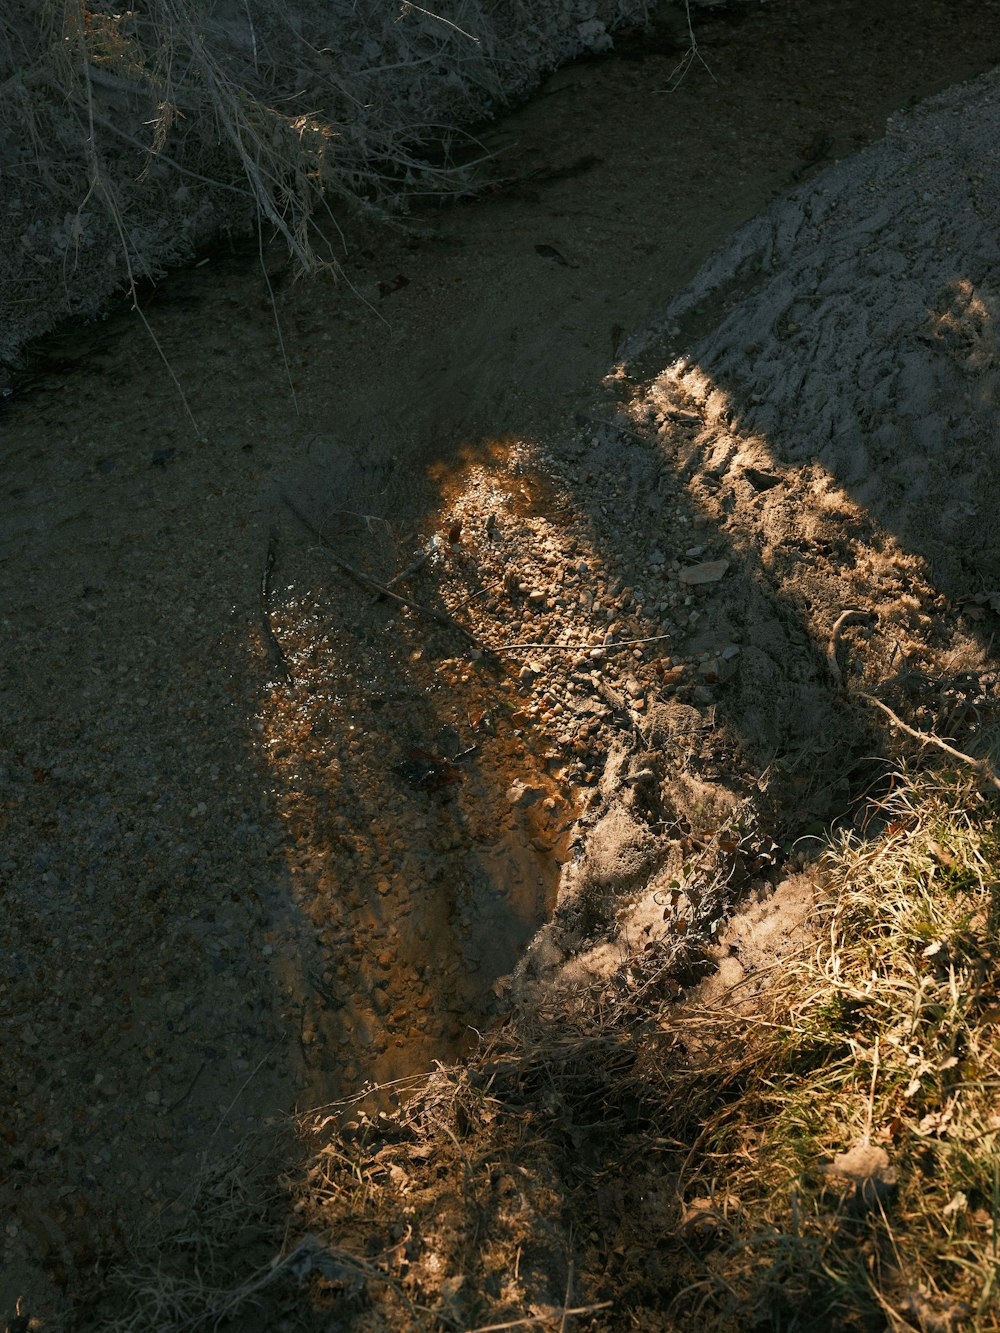 the shadow of a person riding a horse on a trail